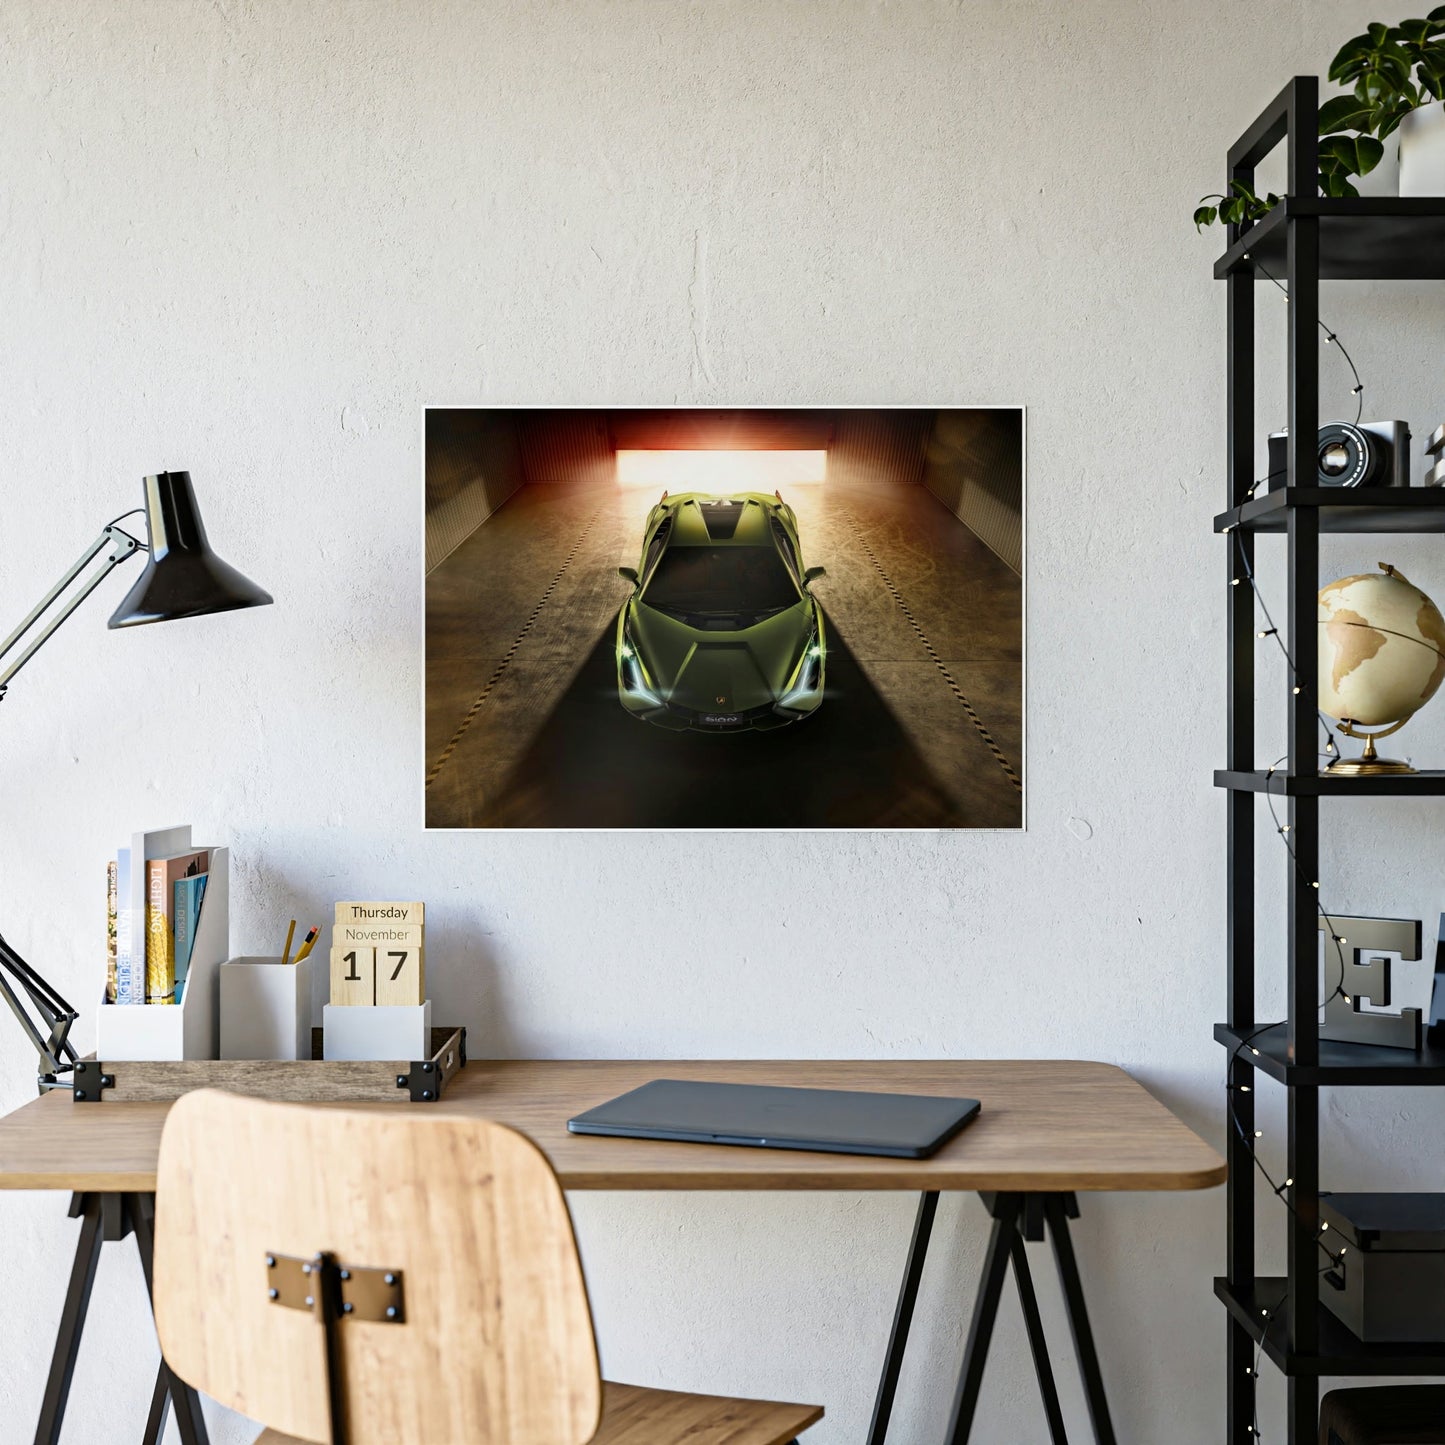 The Power of Perfection: Stunning Canvas Print of Lamborghini